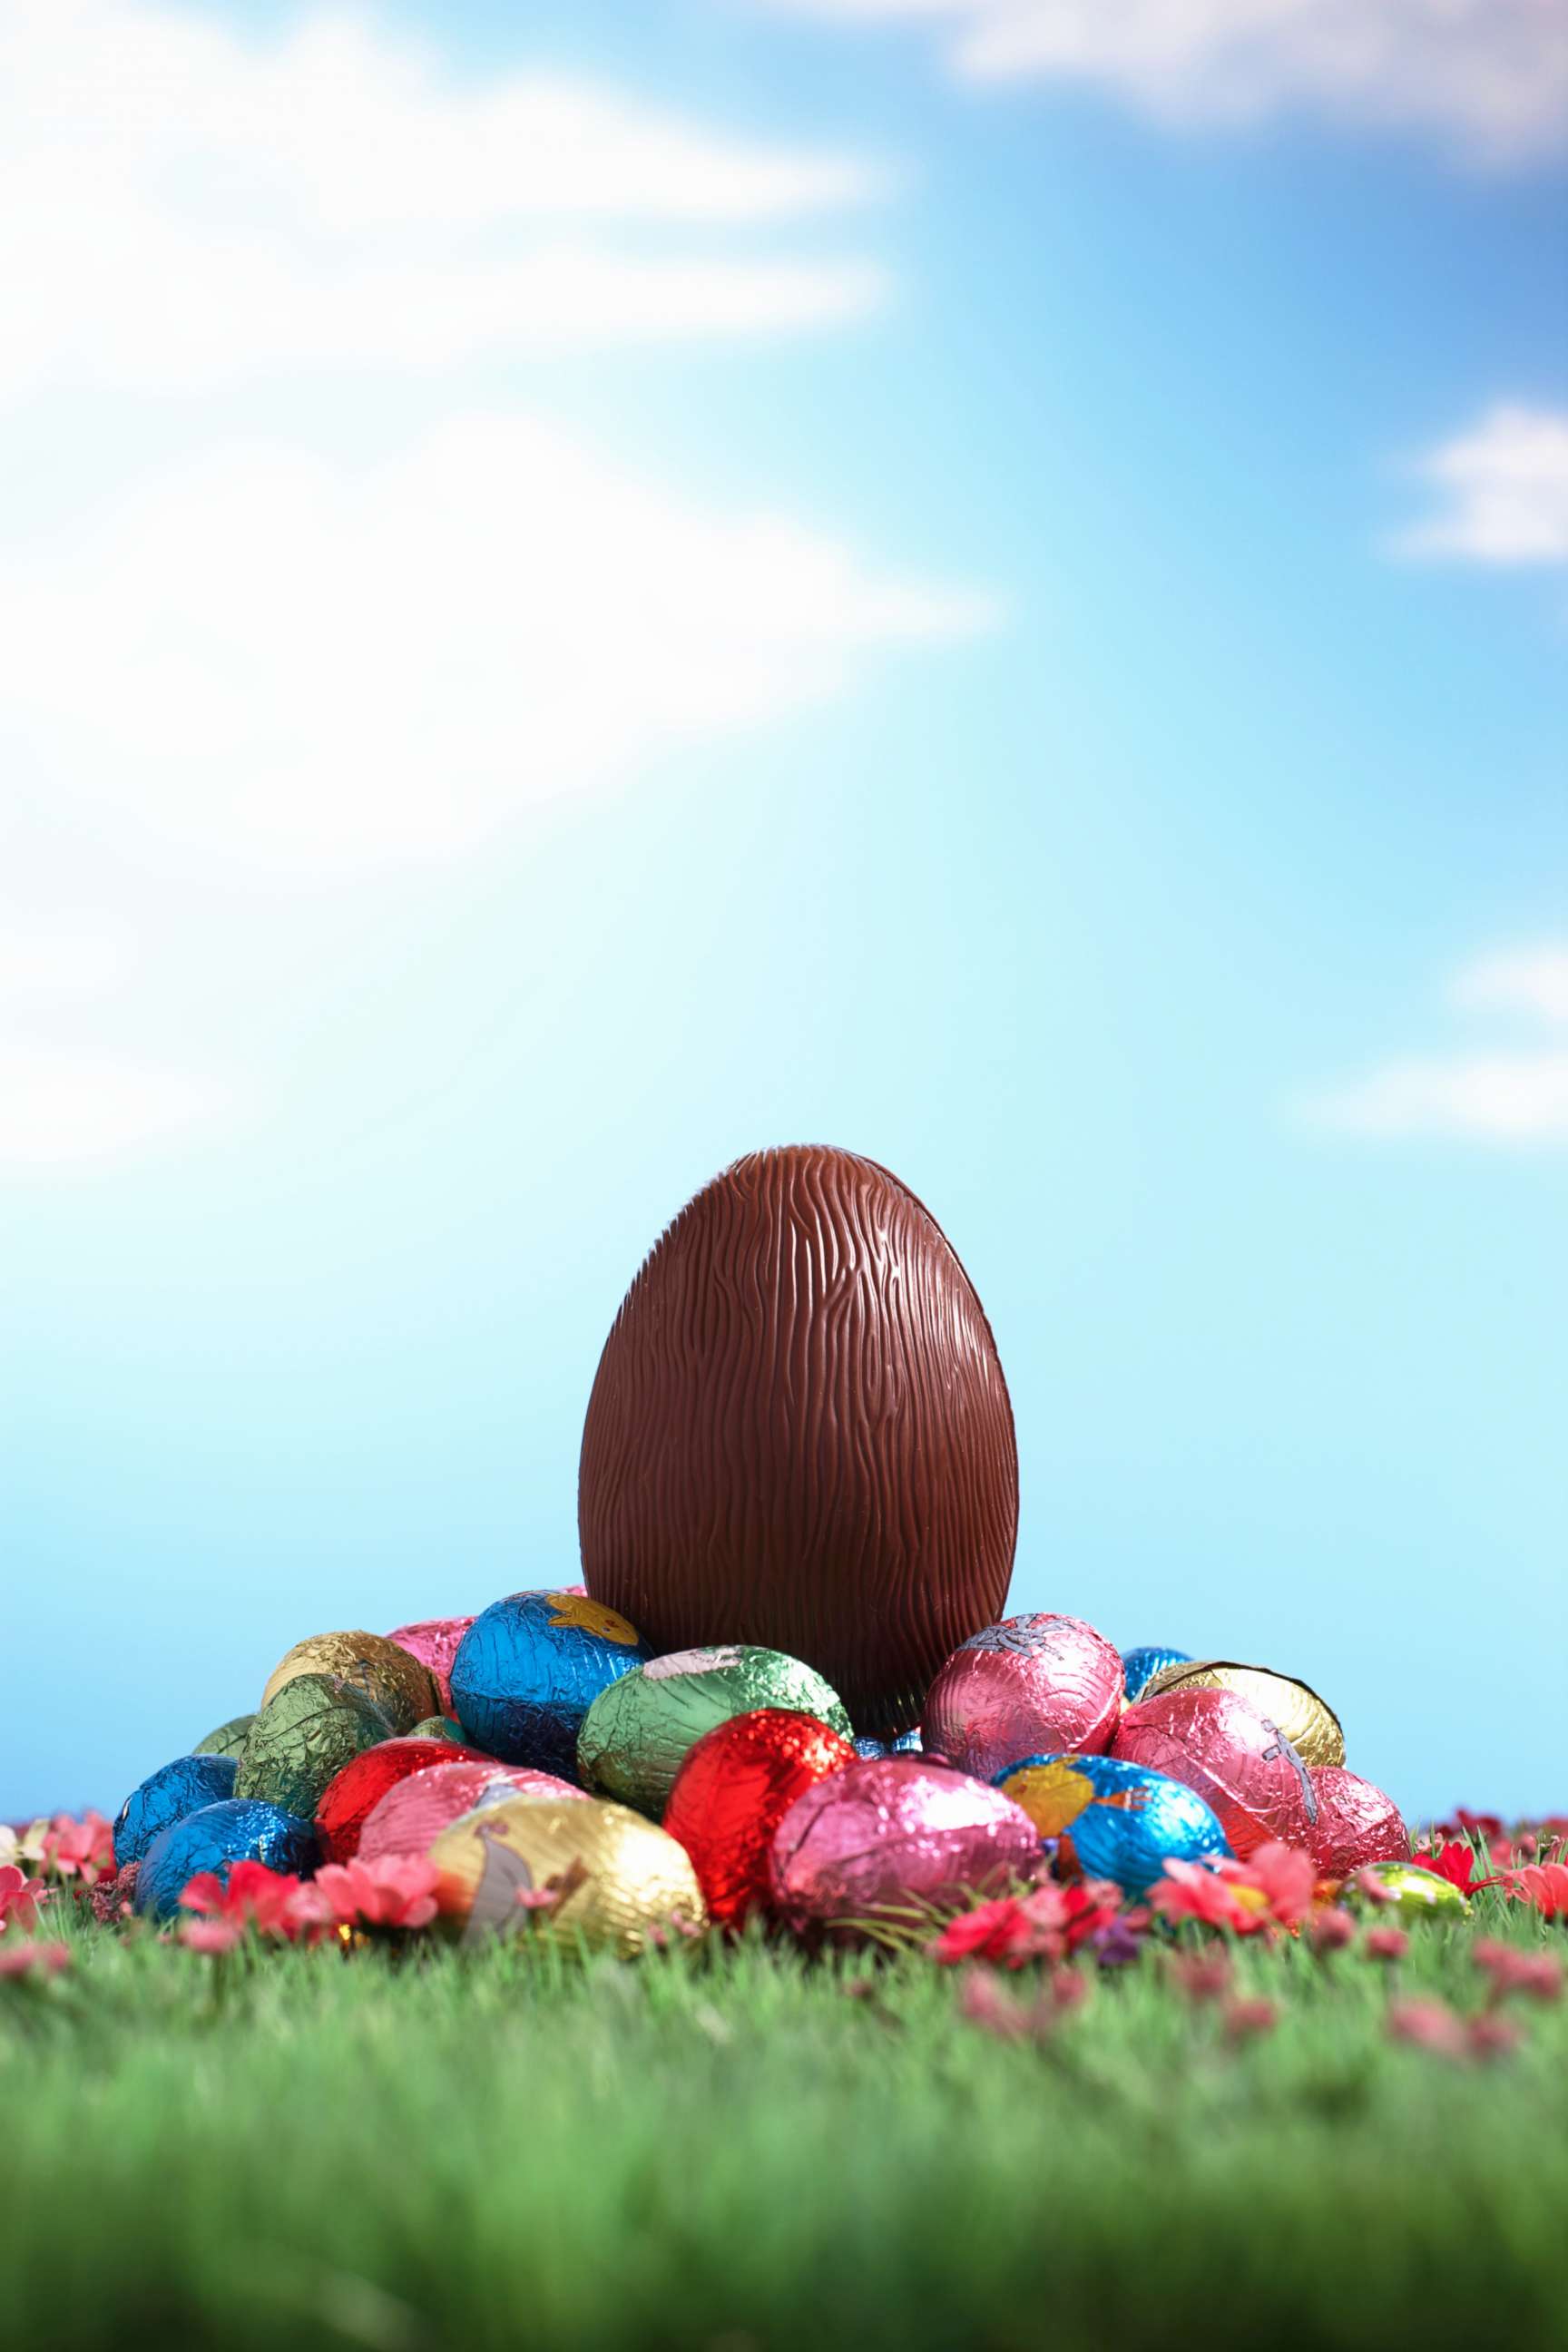 PHOTO: A chocolate egg sits on pile of foil wrapped Easter eggs on grass.